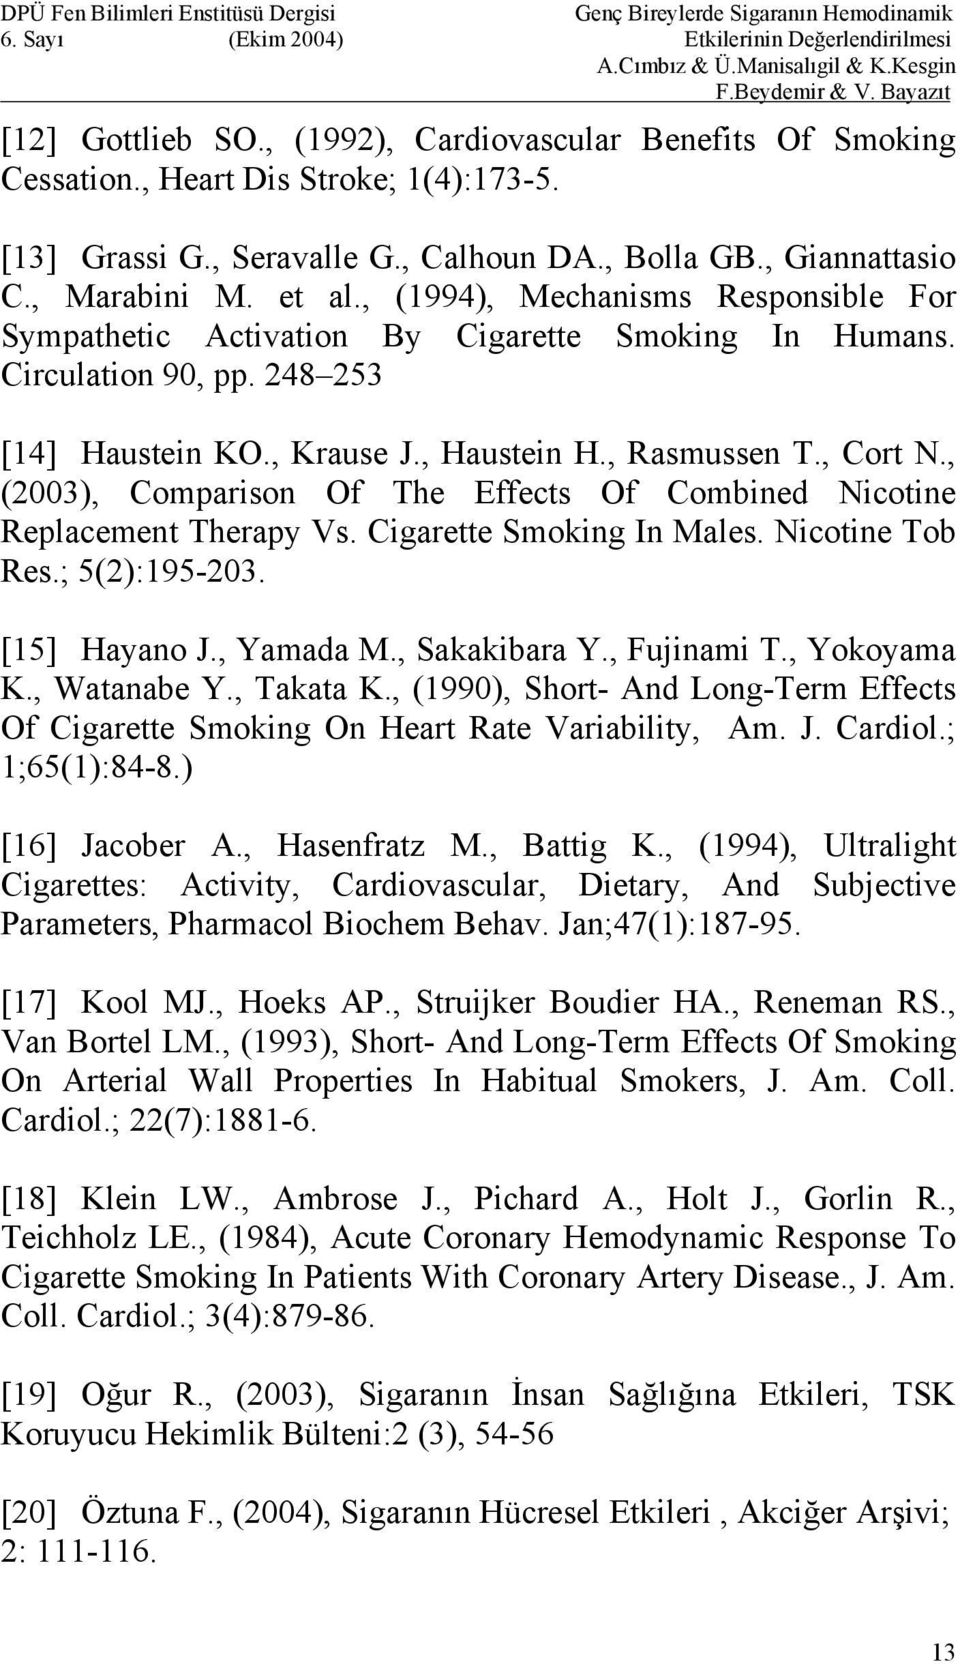 , (2003), Comparison Of The Effects Of Combined Nicotine Replacement Therapy Vs. Cigarette Smoking In Males. Nicotine Tob Res.; 5(2):195-203. [15] Hayano J., Yamada M., Sakakibara Y., Fujinami T.